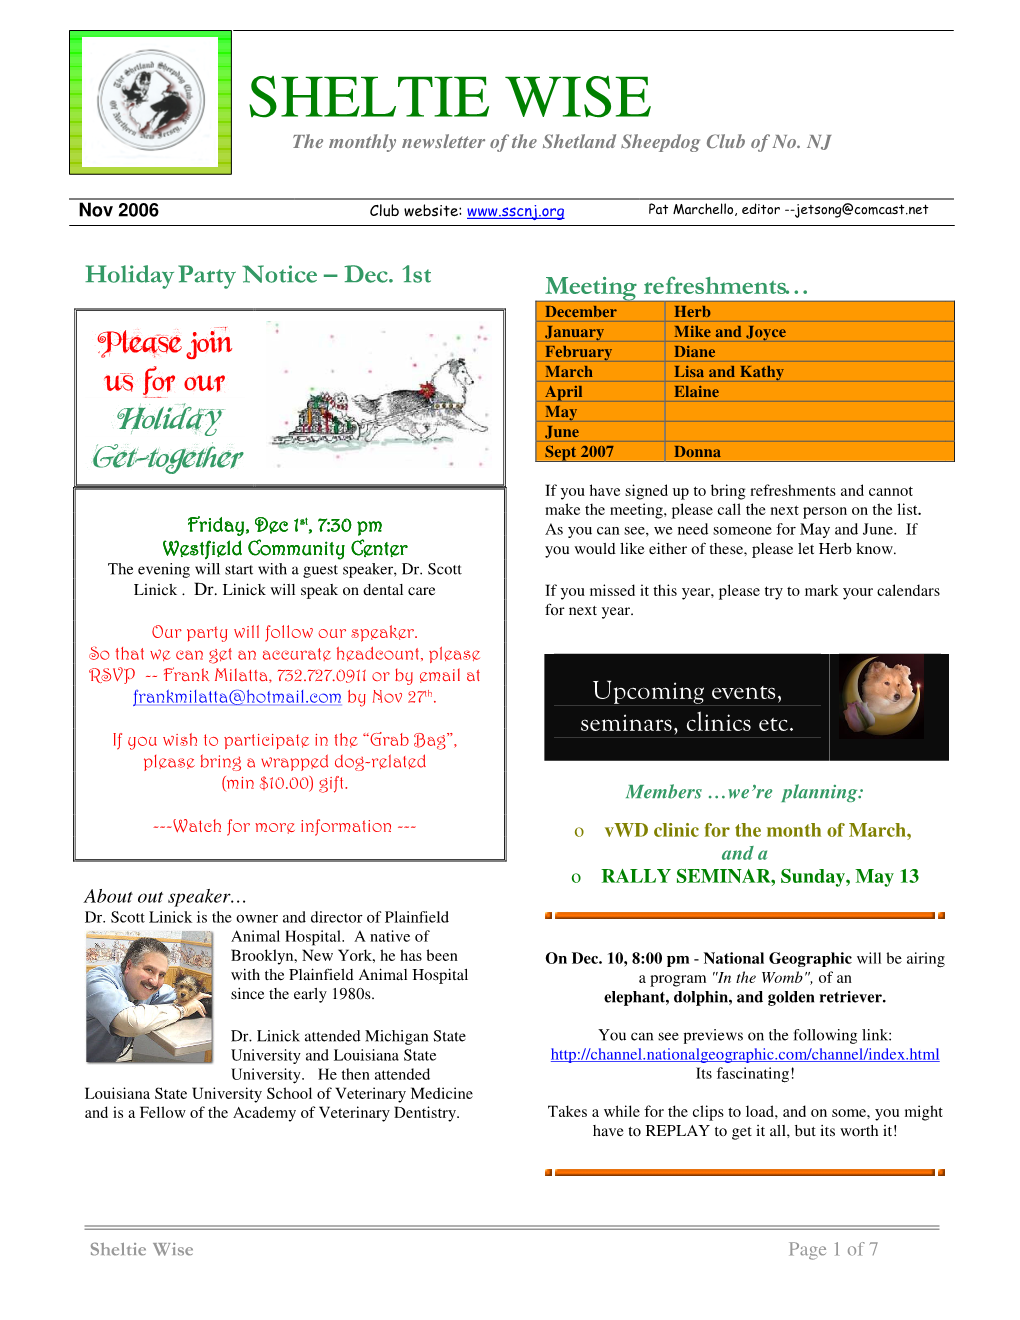 SHELTIE WISE the Monthly Newsletter of the Shetland Sheepdog Club of No